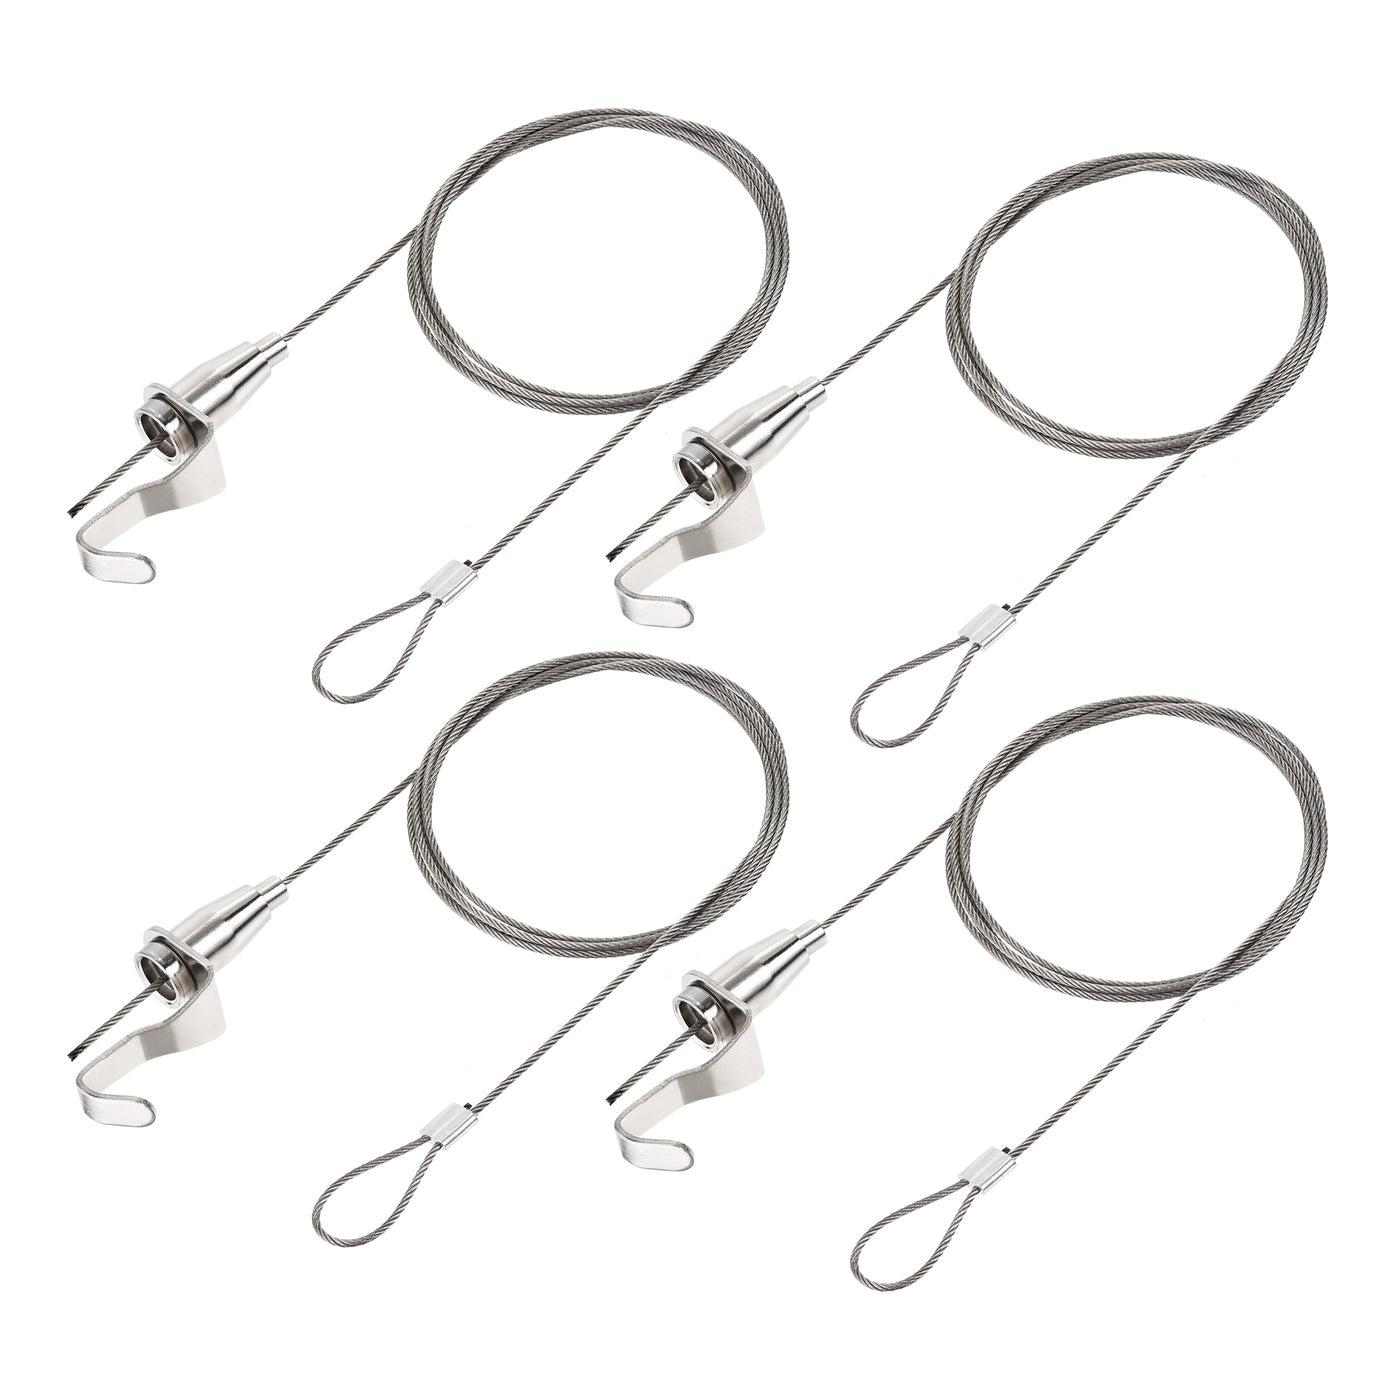 uxcell Uxcell Picture Hanging Wire Kit, 4pcs 1.5M Adjustable Rail Hanging System for Home Picture Art Gallery Picture Display Kit, Load 66 lbs